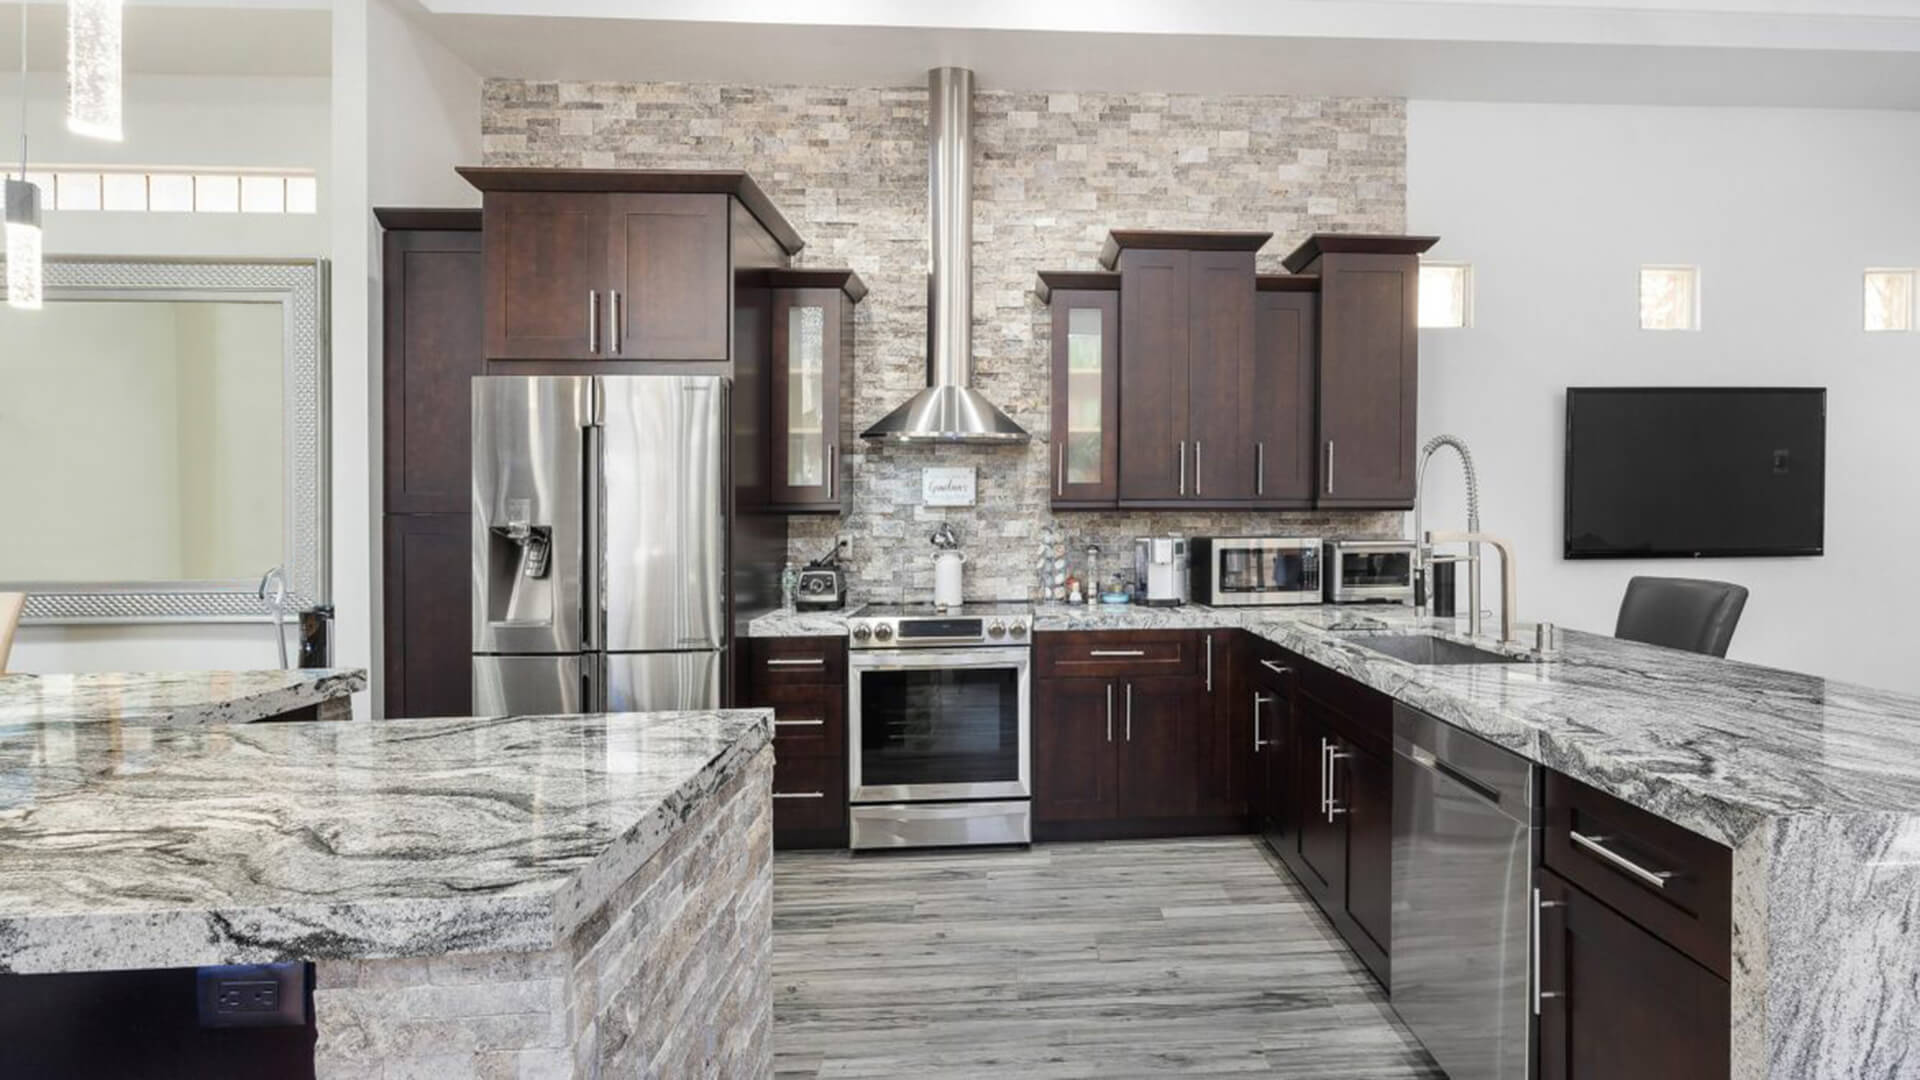 Why Espresso Shaker Cabinets are a Popular Choice